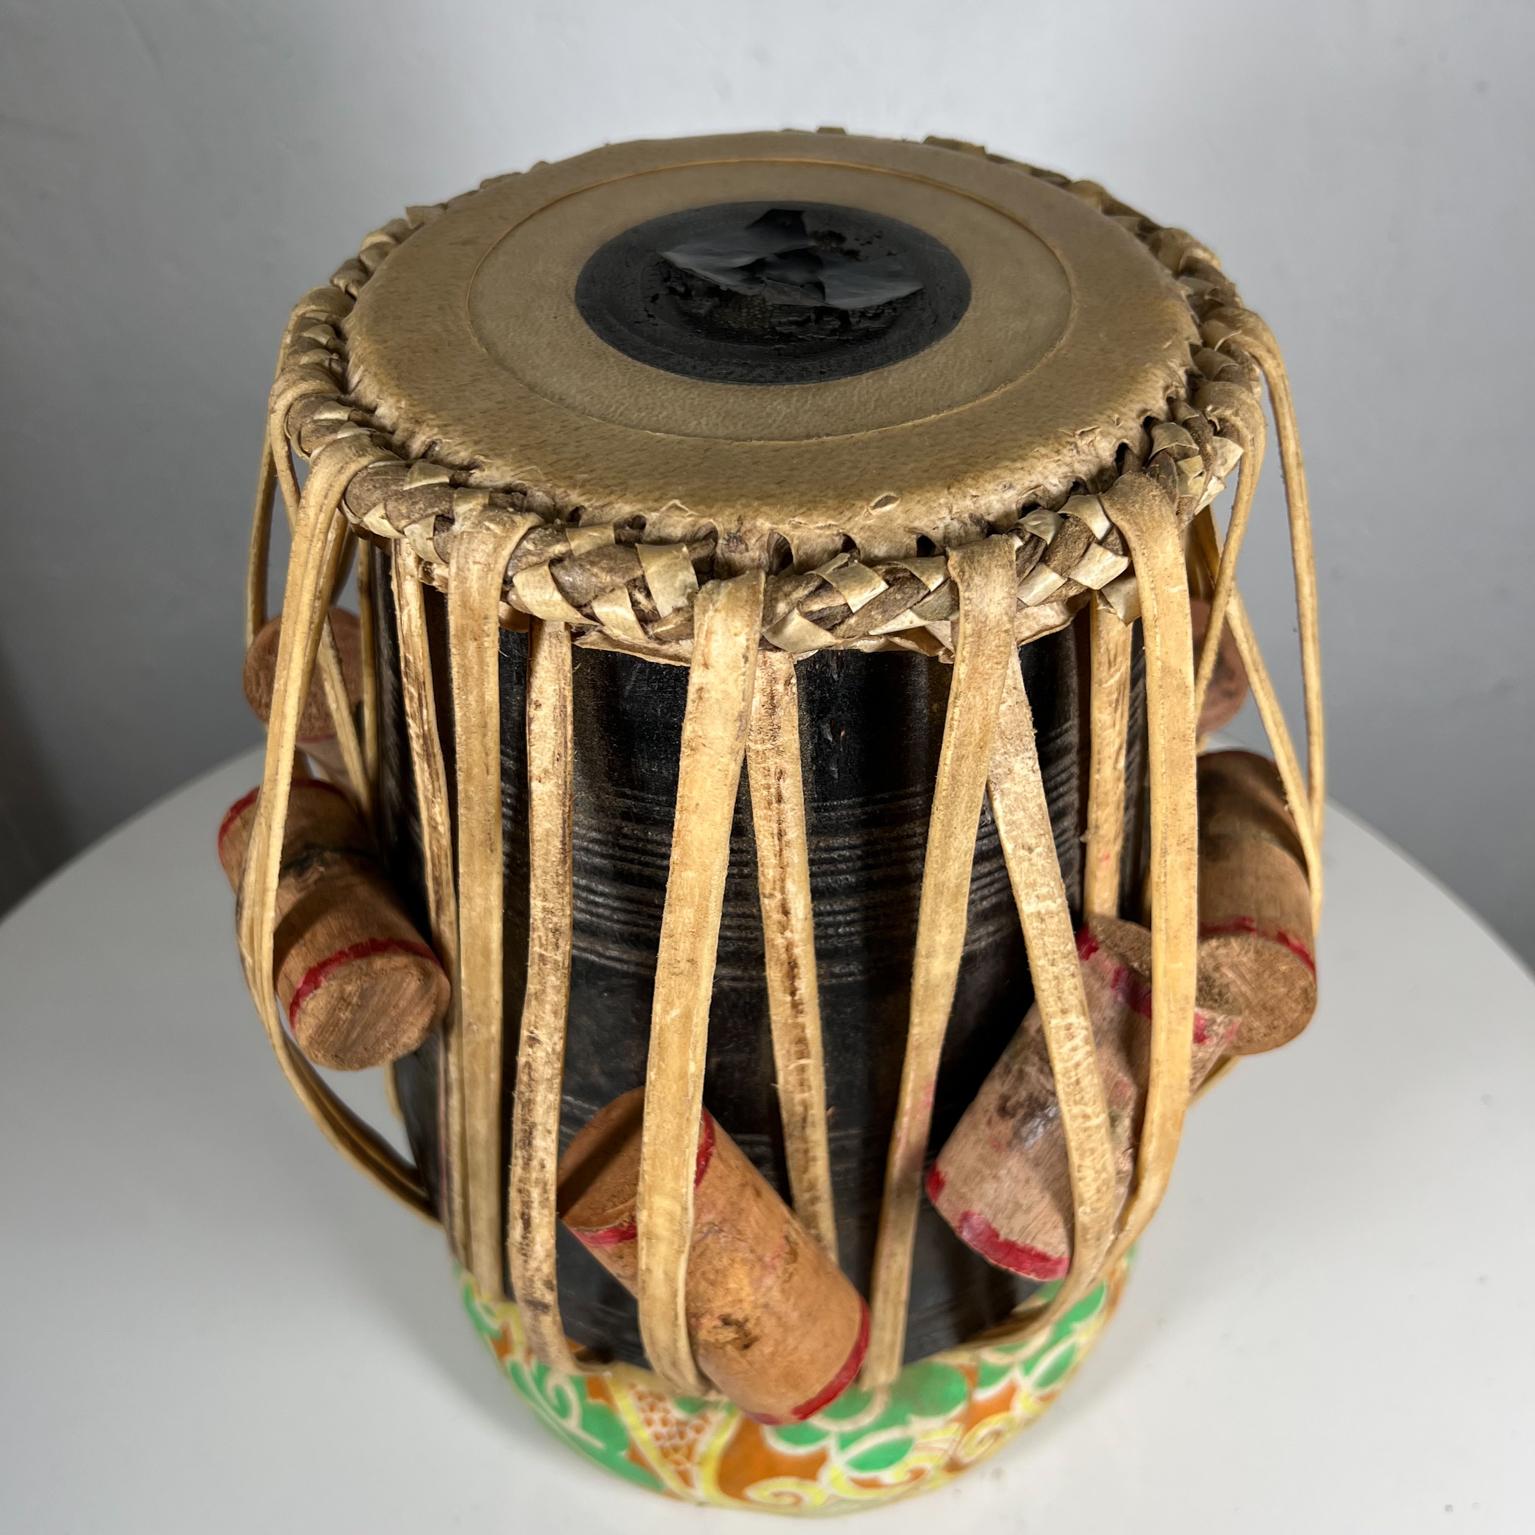 1970s Vintage Musical Tabla Wood Drum from Bombay India
12 tall x 7 diameter
Preowned unrestored vintage condition
See images provided.
 